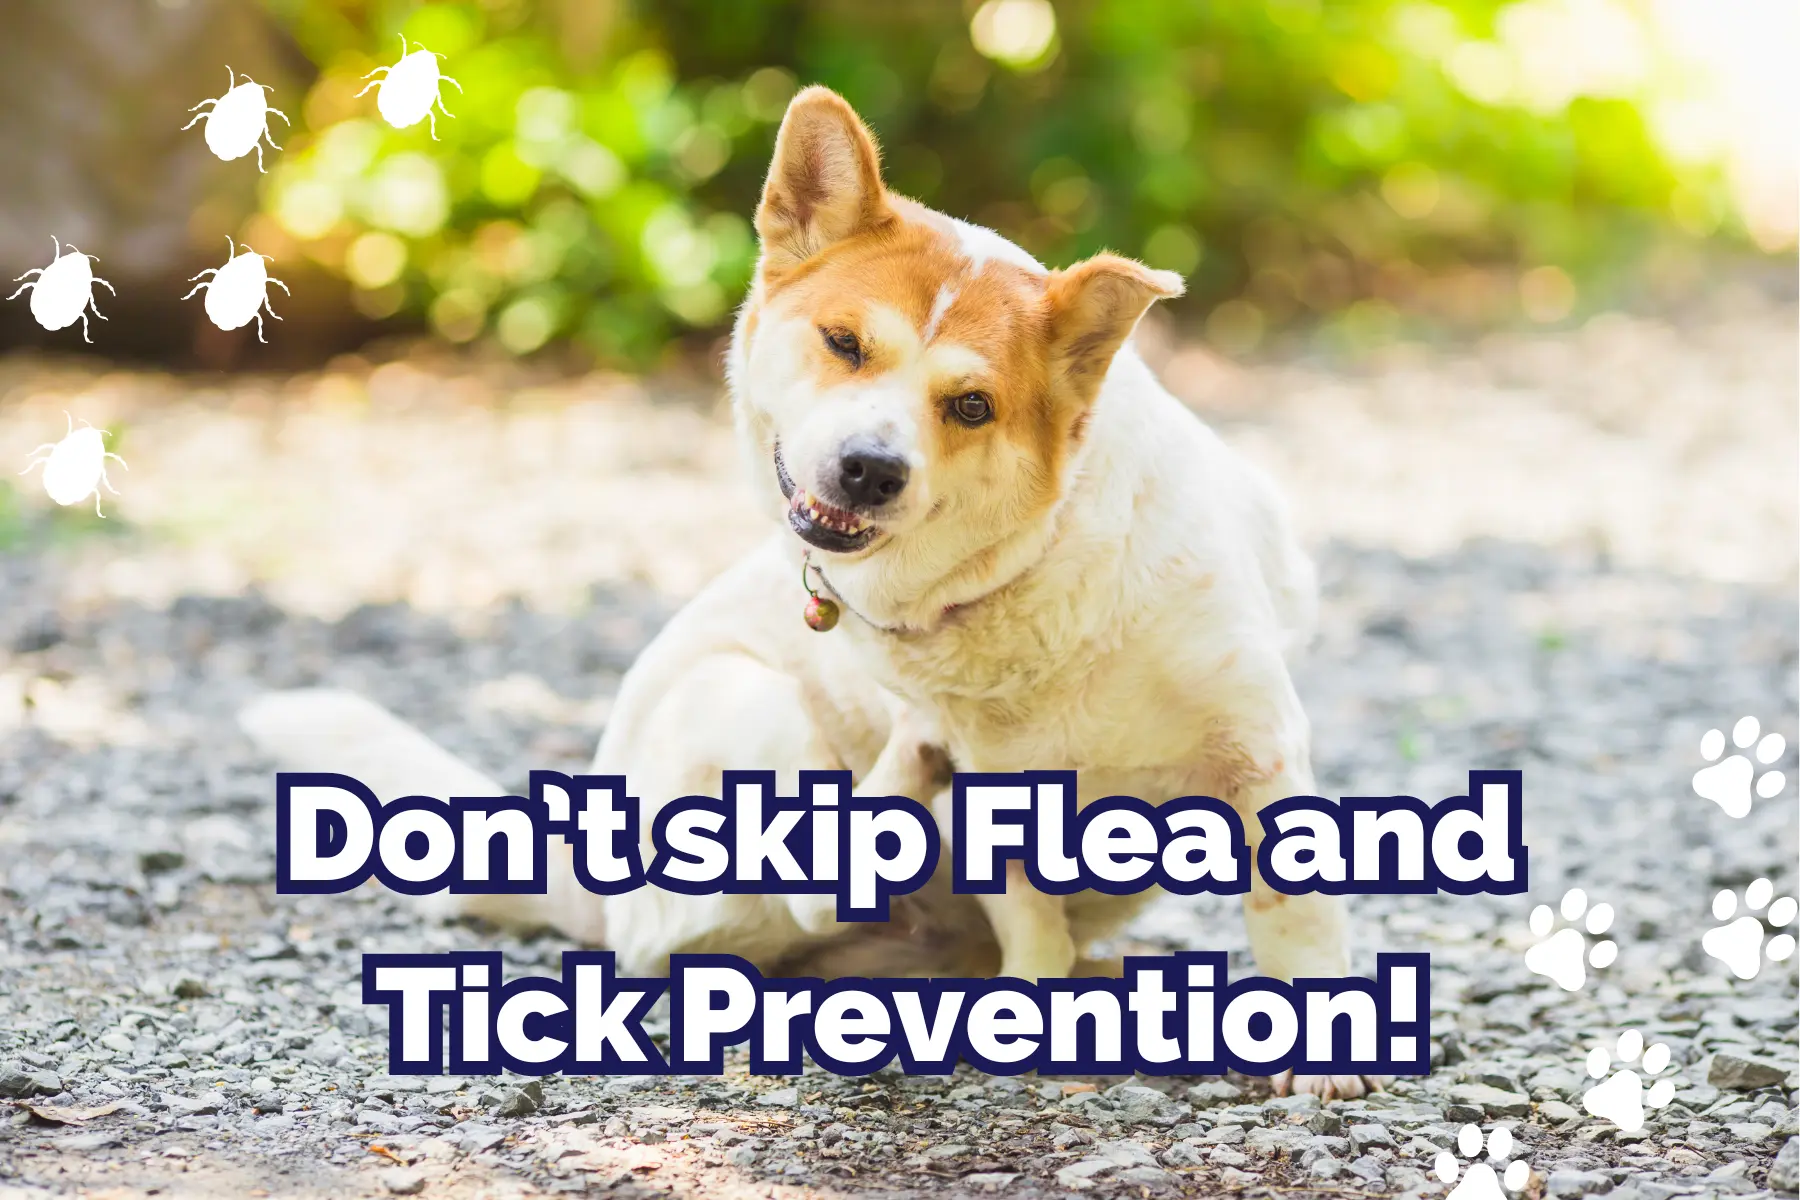 text: don't skip flea and tick prevention. image: dog itching itself